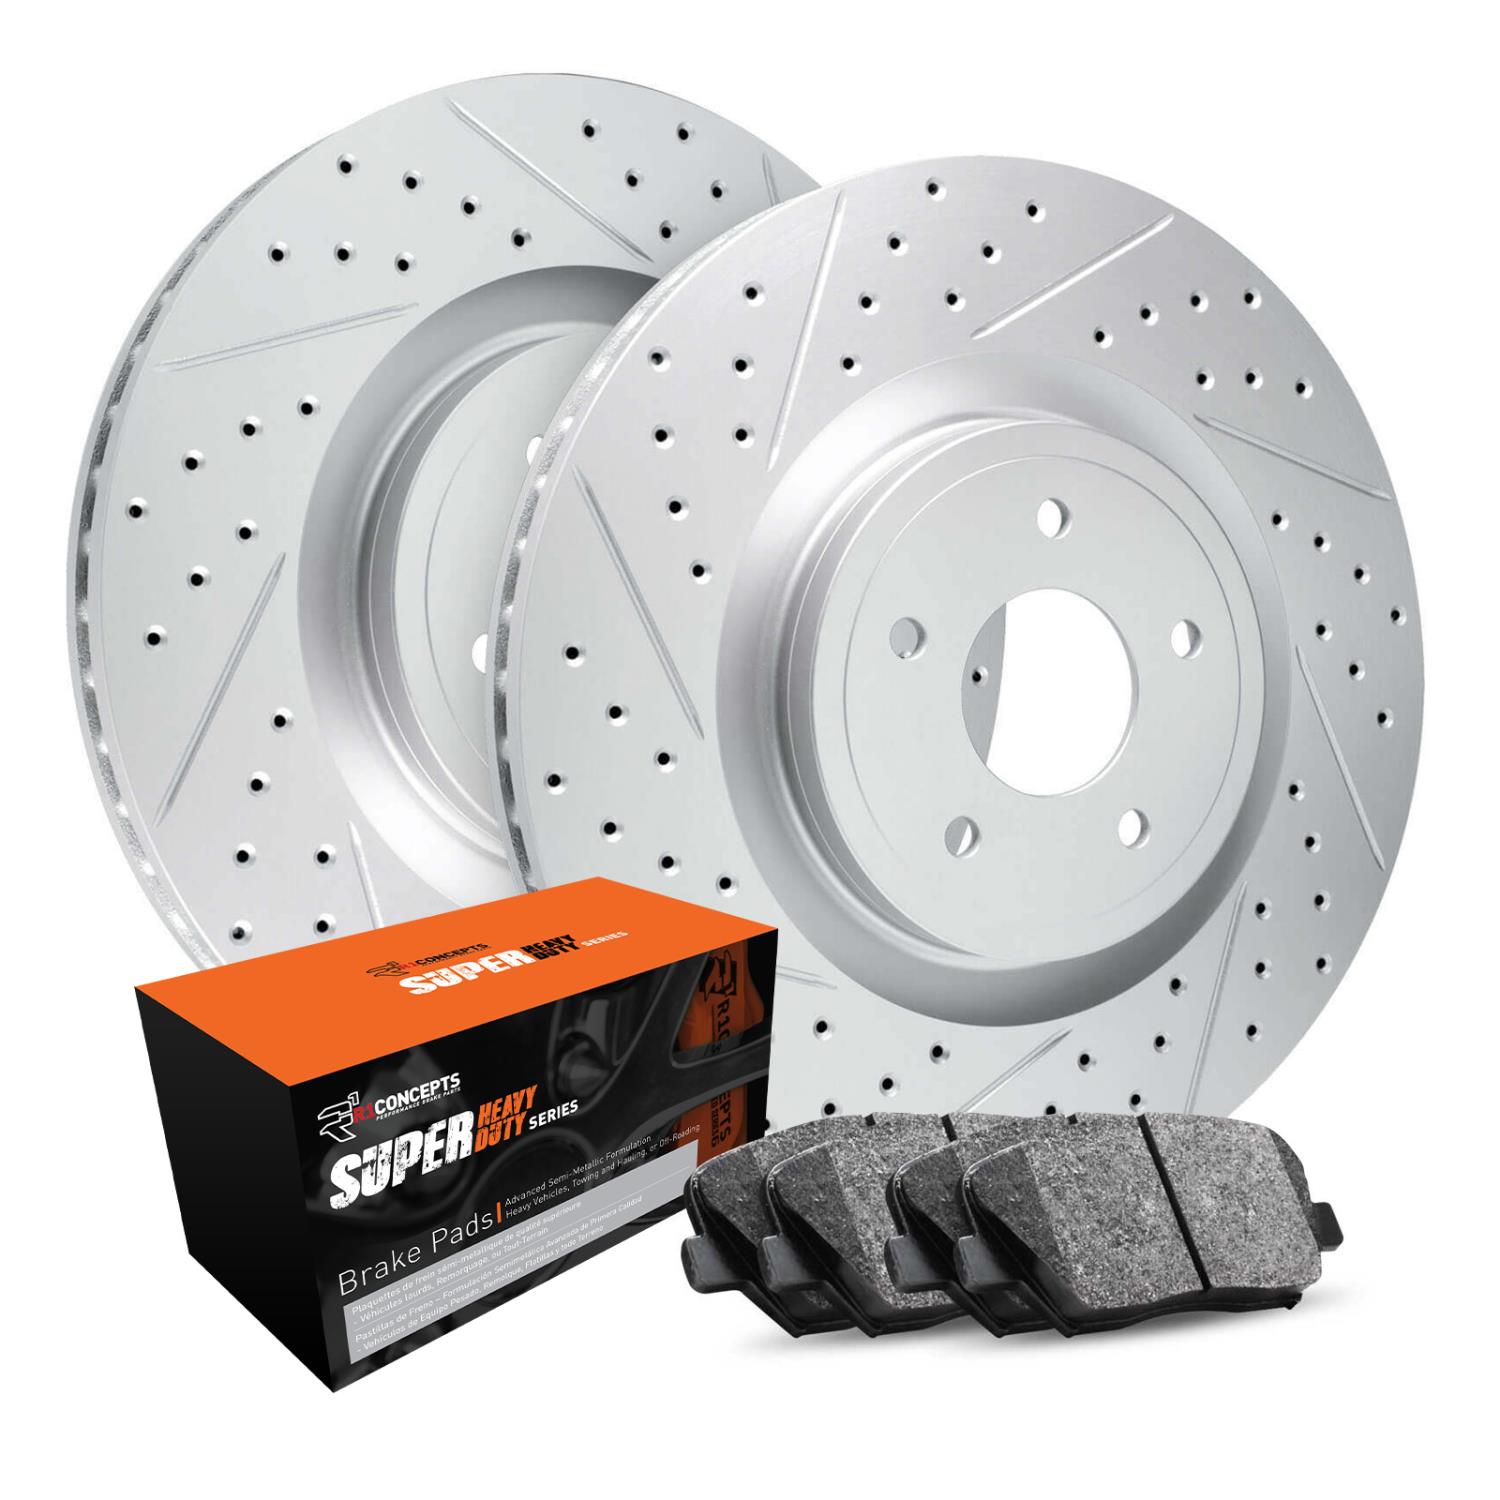 GEO-Carbon Drilled & Slotted Brake Rotor Set w/Super-Duty Pads, 2005-2010 Fits Multiple Makes/Models, Position: Rear